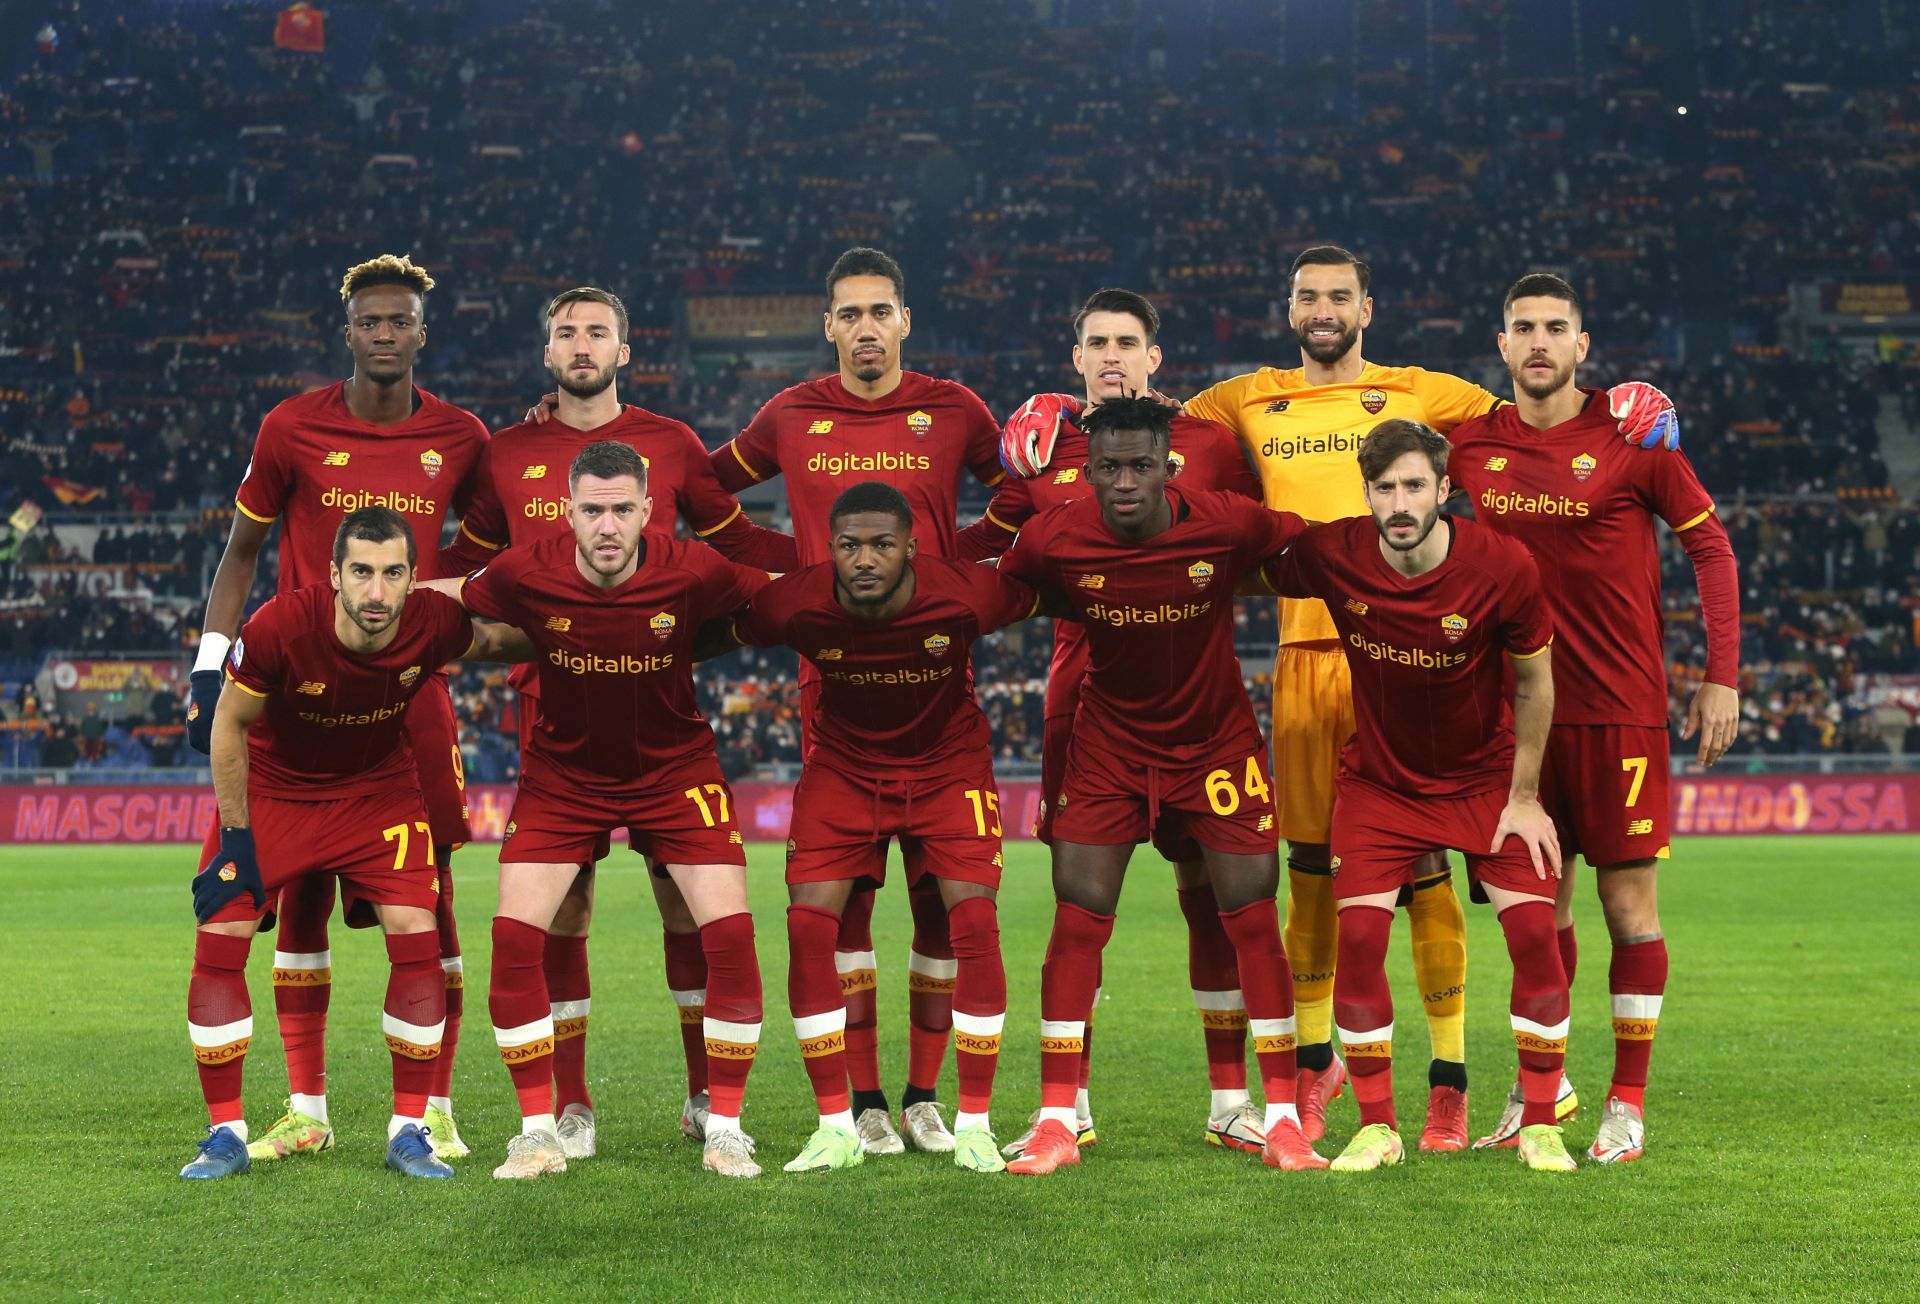 Roma play Cagliari on Sunday in Serie A